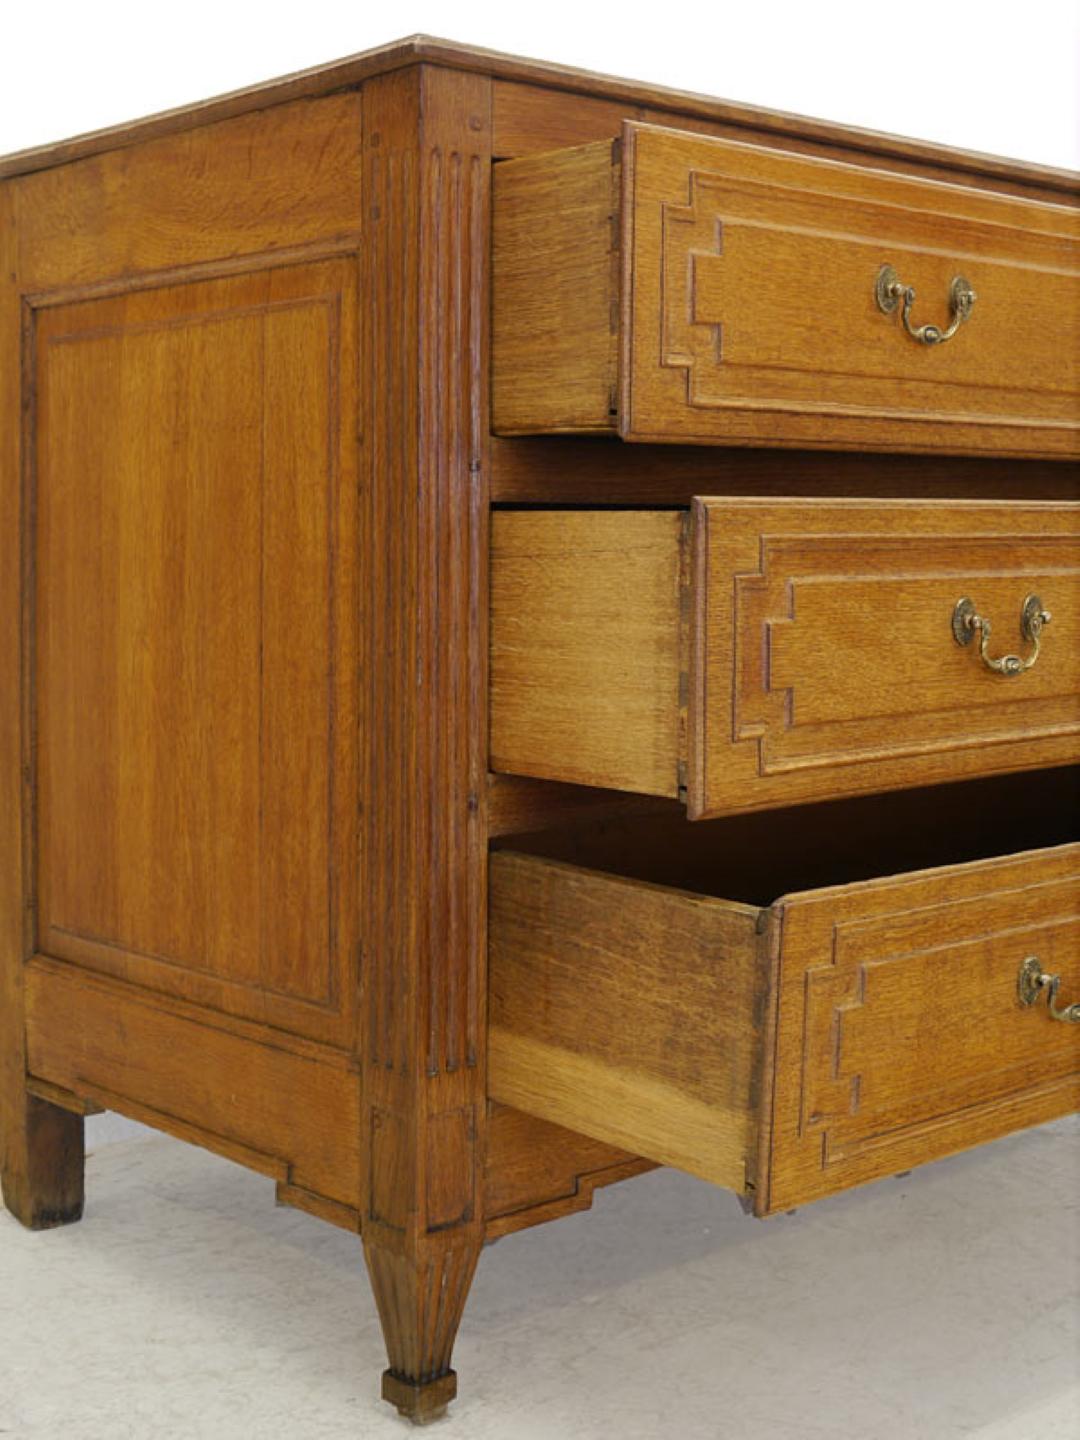 Revival Grunderzeit Chest of Drawers Made of Solid Oak, circa 1880